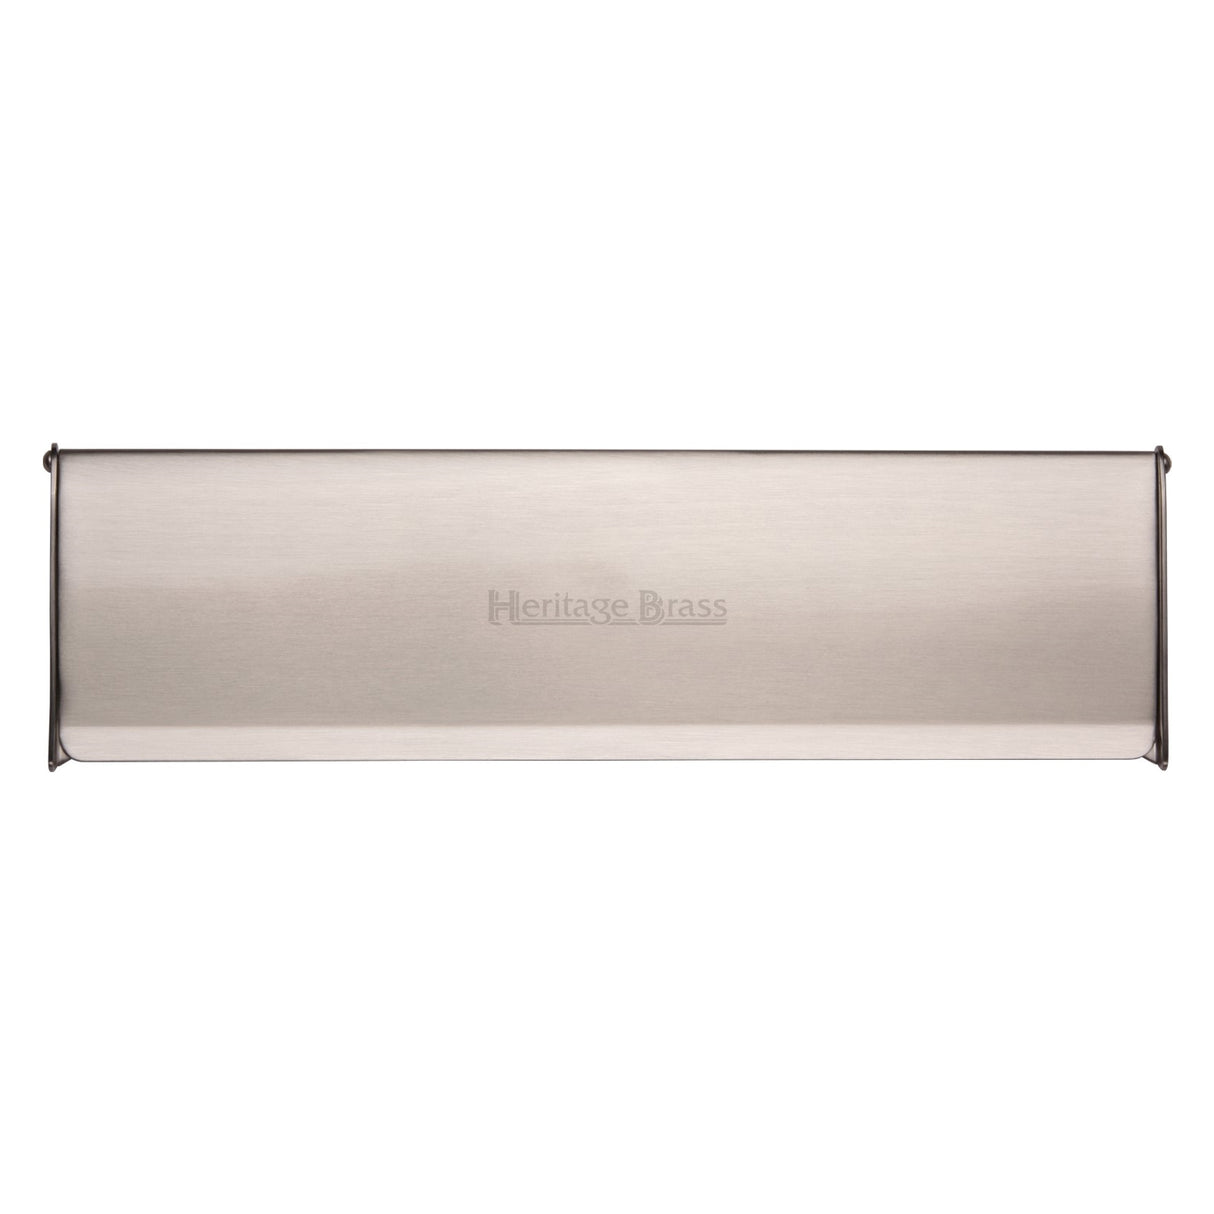 This is an image of a Heritage Brass - Interior Letterflap 15 3/4 x 4 Satin Nickel finish, v860-403-sn that is available to order from Trade Door Handles in Kendal.